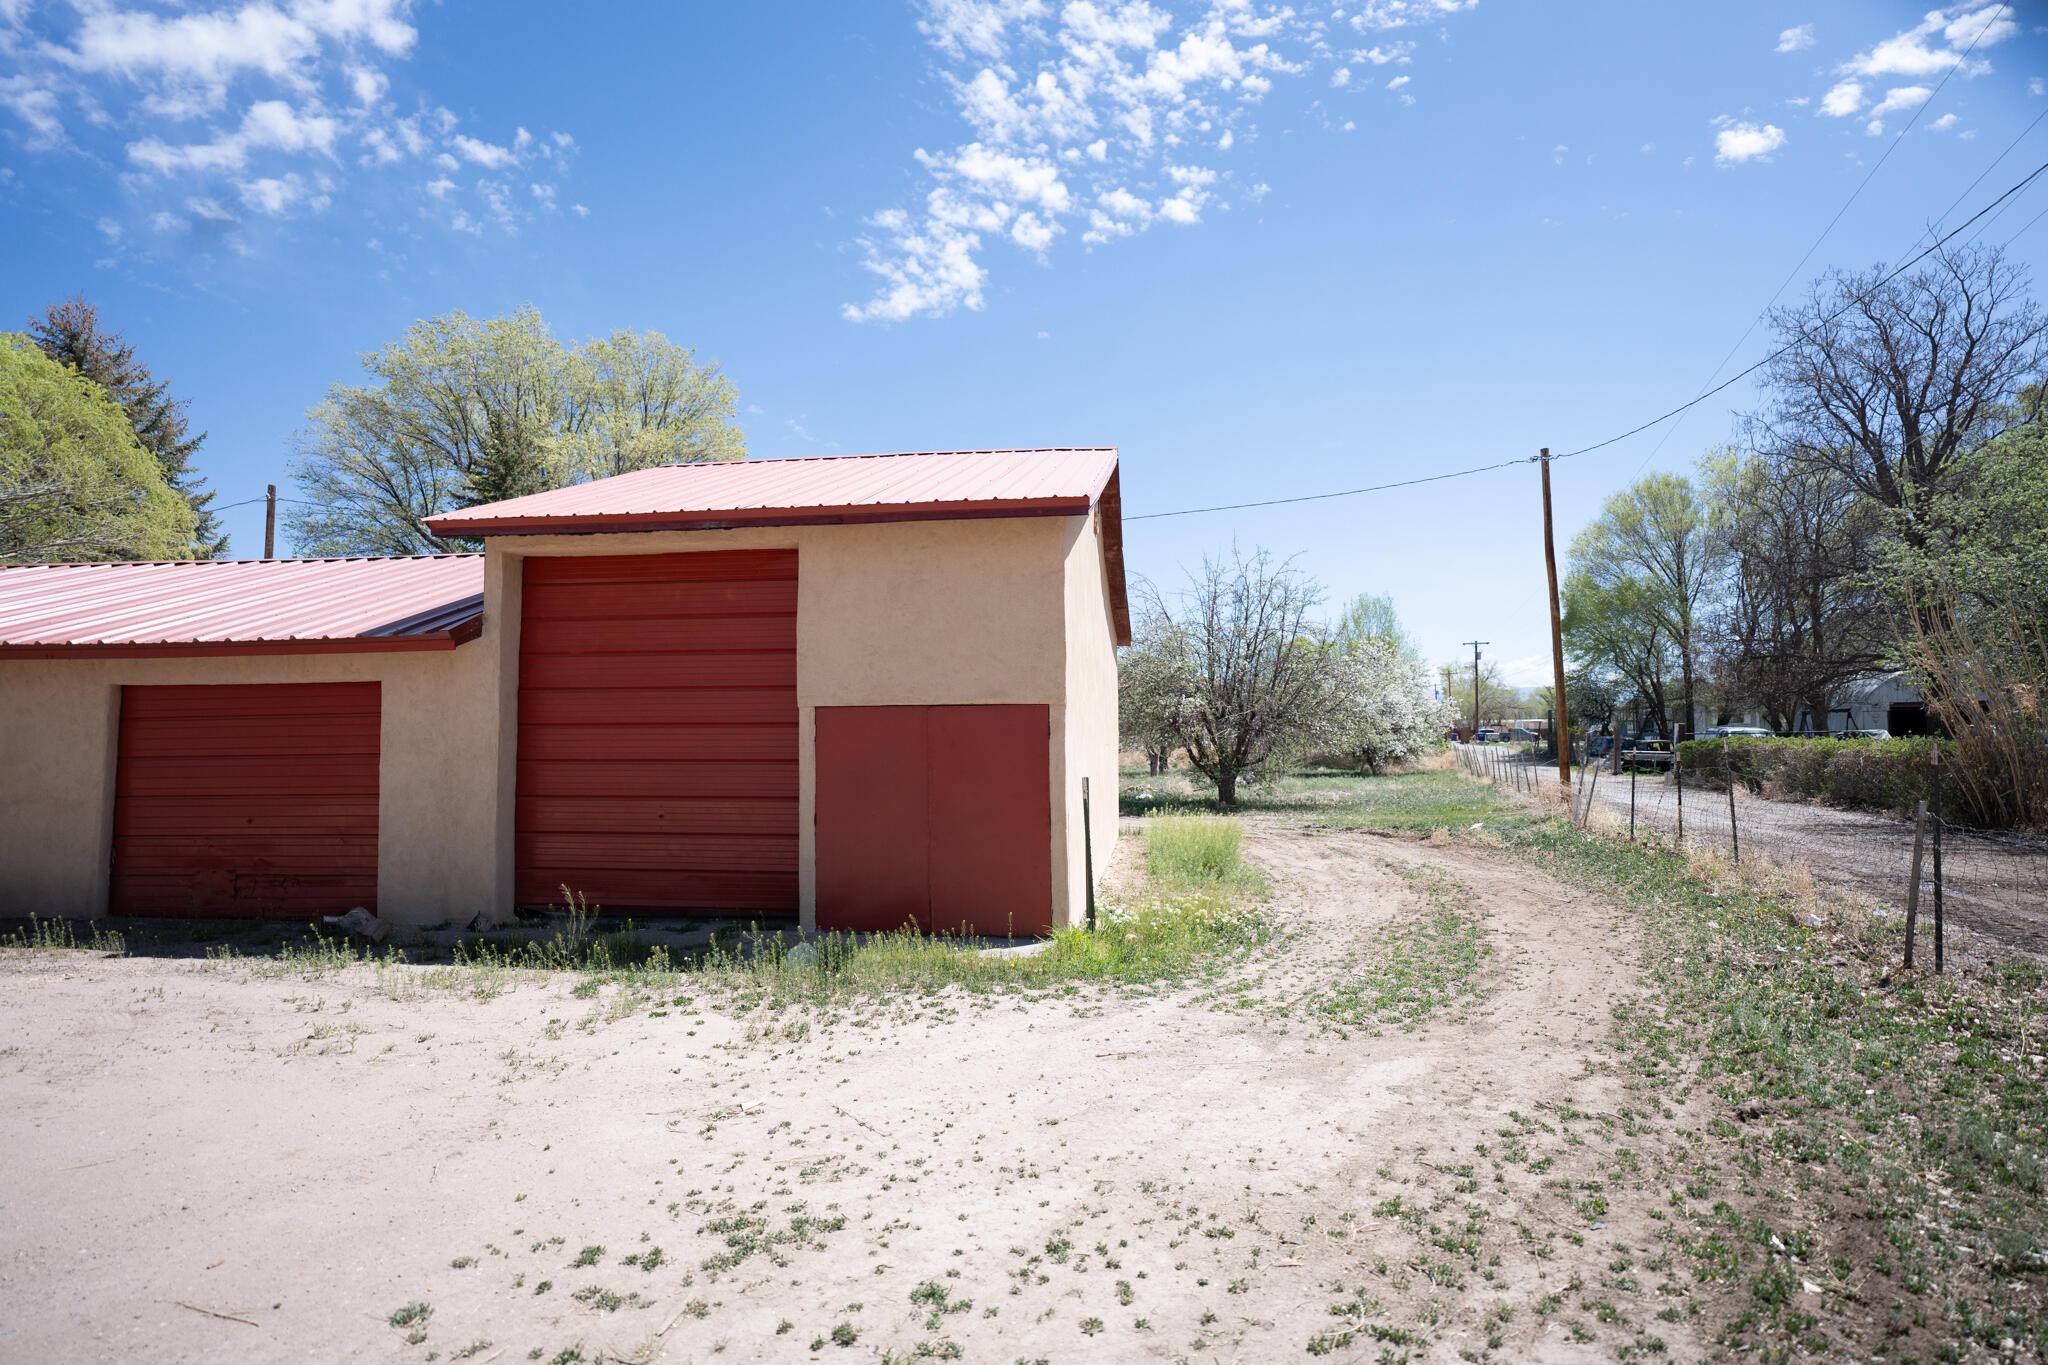 1715 N Mccurdy Road, Espanola, New Mexico 87532, 3 Bedrooms Bedrooms, ,2 BathroomsBathrooms,Residential,For Sale,1715 N Mccurdy Road,1061269